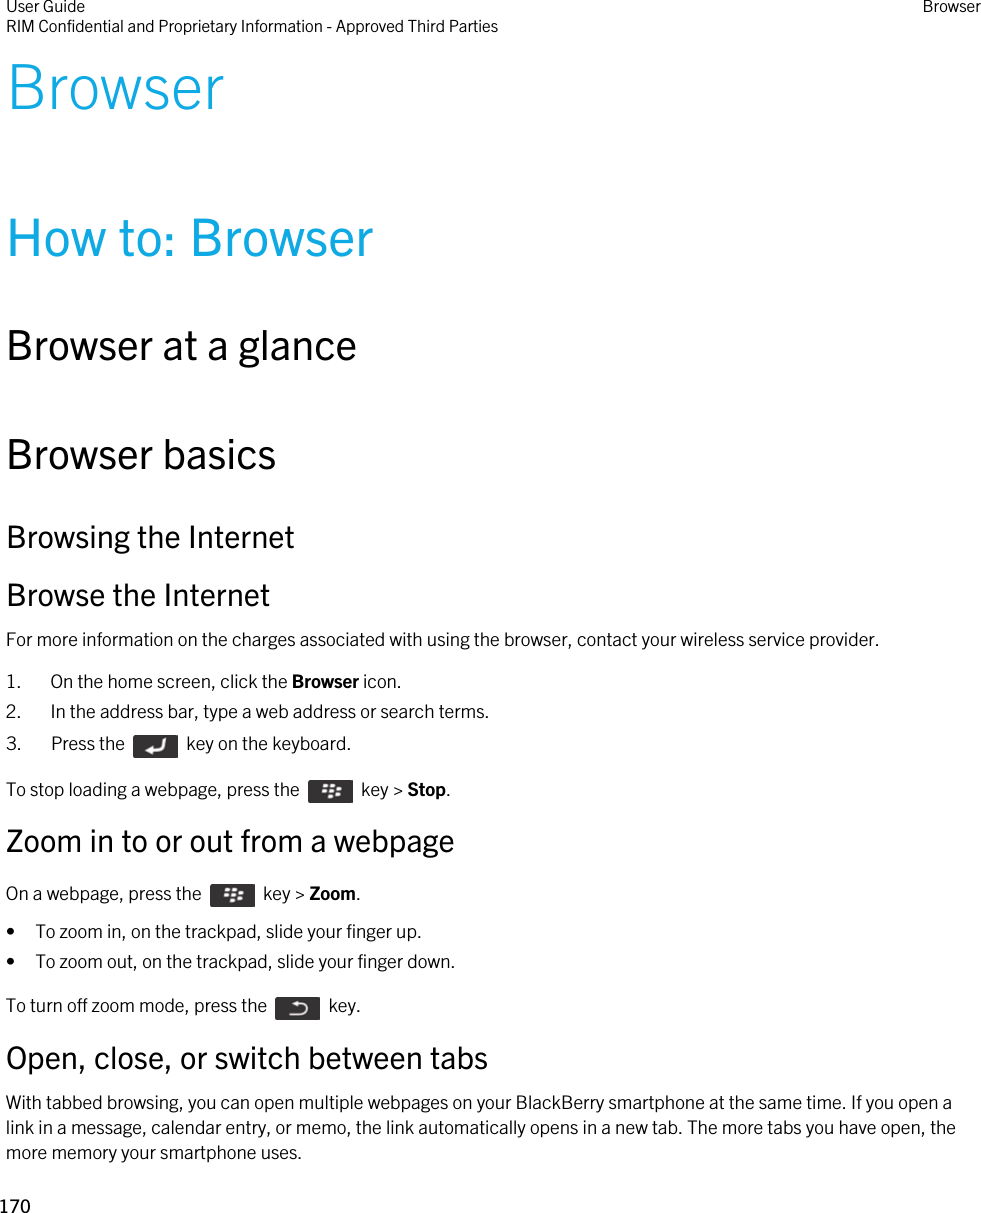 BrowserHow to: BrowserBrowser at a glanceBrowser basicsBrowsing the InternetBrowse the InternetFor more information on the charges associated with using the browser, contact your wireless service provider.1. On the home screen, click the Browser icon.2. In the address bar, type a web address or search terms.3.  Press the    key on the keyboard. To stop loading a webpage, press the    key &gt; Stop.Zoom in to or out from a webpageOn a webpage, press the    key &gt; Zoom. • To zoom in, on the trackpad, slide your finger up.• To zoom out, on the trackpad, slide your finger down.To turn off zoom mode, press the    key.Open, close, or switch between tabsWith tabbed browsing, you can open multiple webpages on your BlackBerry smartphone at the same time. If you open a link in a message, calendar entry, or memo, the link automatically opens in a new tab. The more tabs you have open, the more memory your smartphone uses.User GuideRIM Confidential and Proprietary Information - Approved Third Parties Browser170 